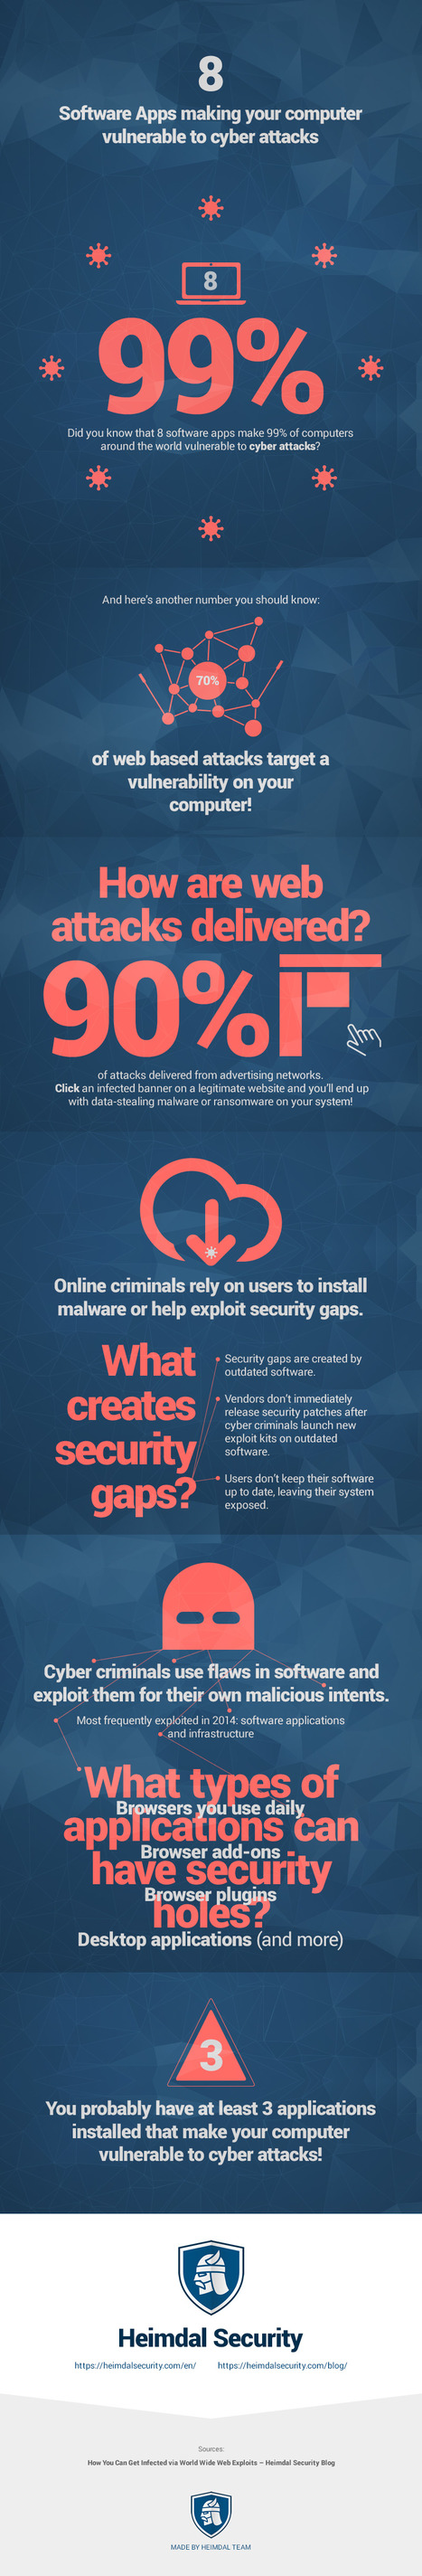 8 Vulnerable Software Apps Exposing Your Computer to Cyber Attacks [Infographic] | CyberSecurity | eSkills | 21st Century Learning and Teaching | Scoop.it